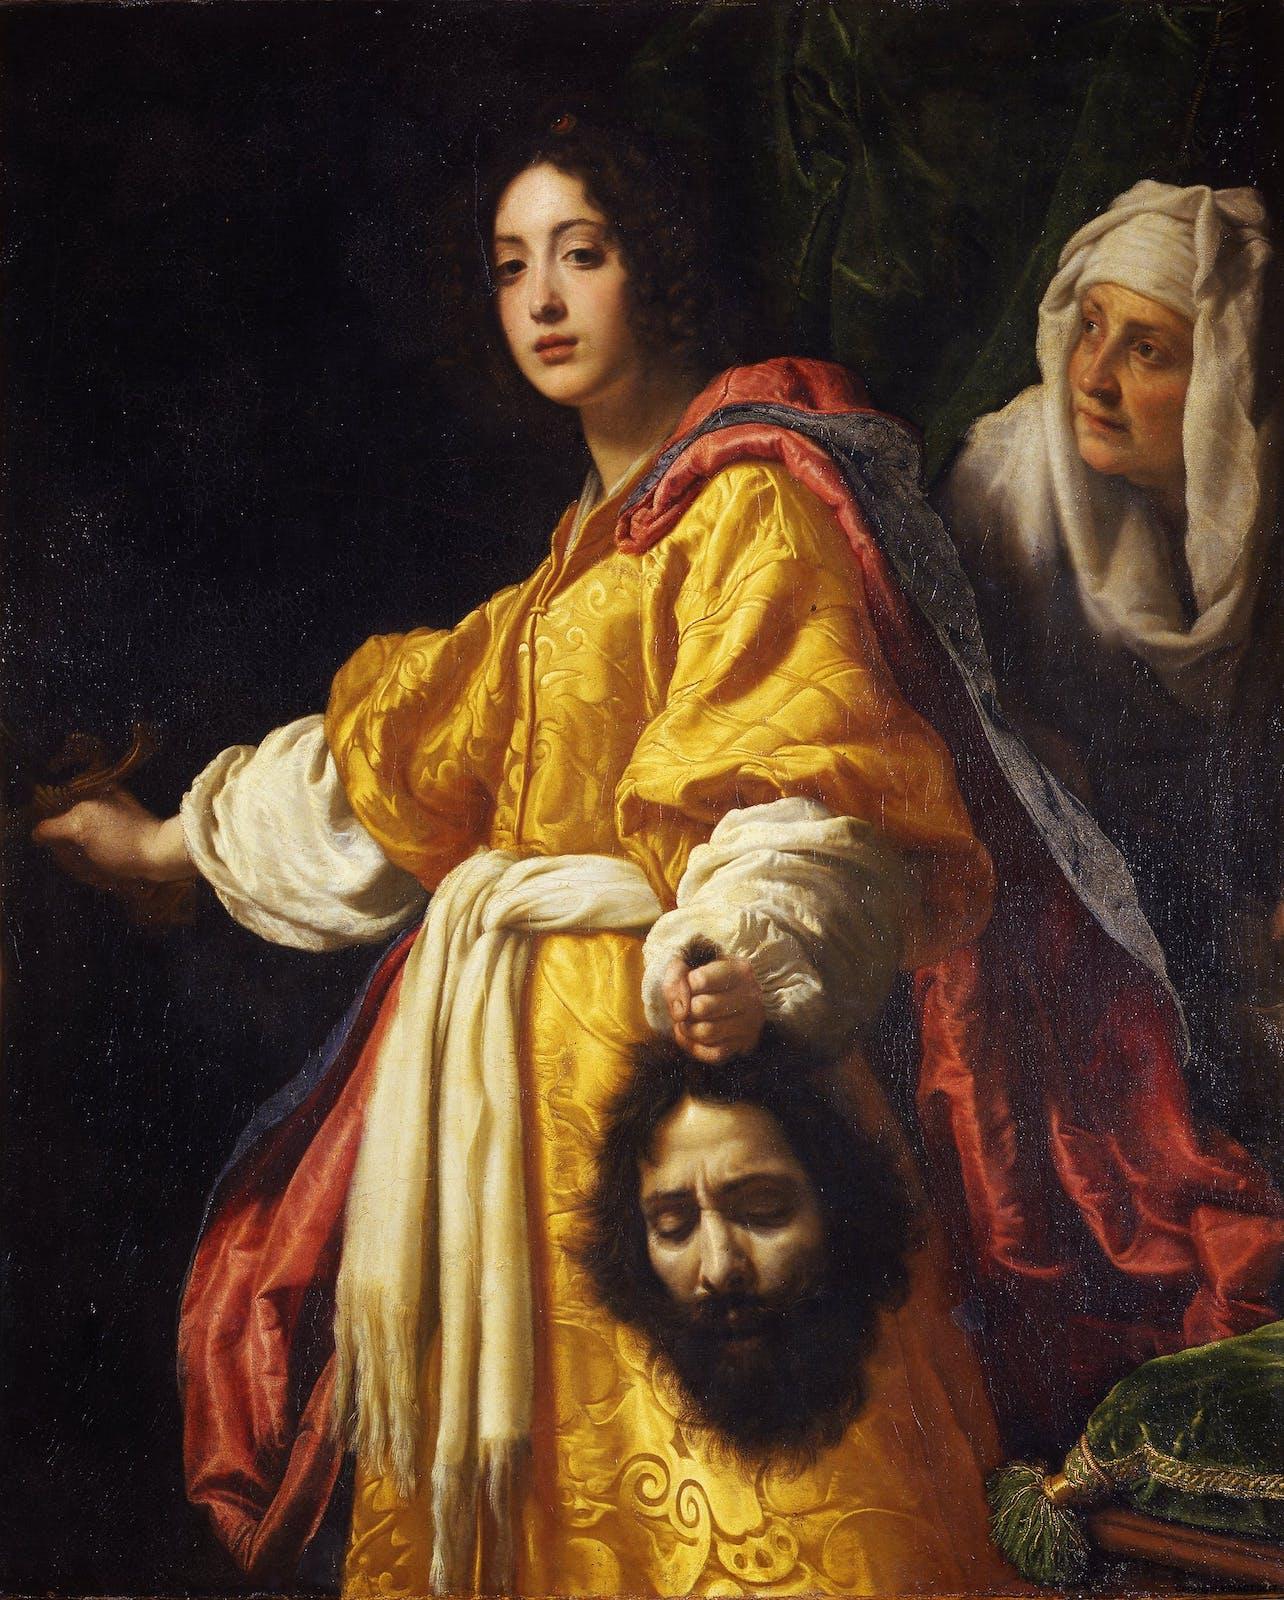 Judith stands with a sword in her right hand and Holofernes’s head in her left. Judith’s maid stands to the left of her, and the blade of the sword is not visible.